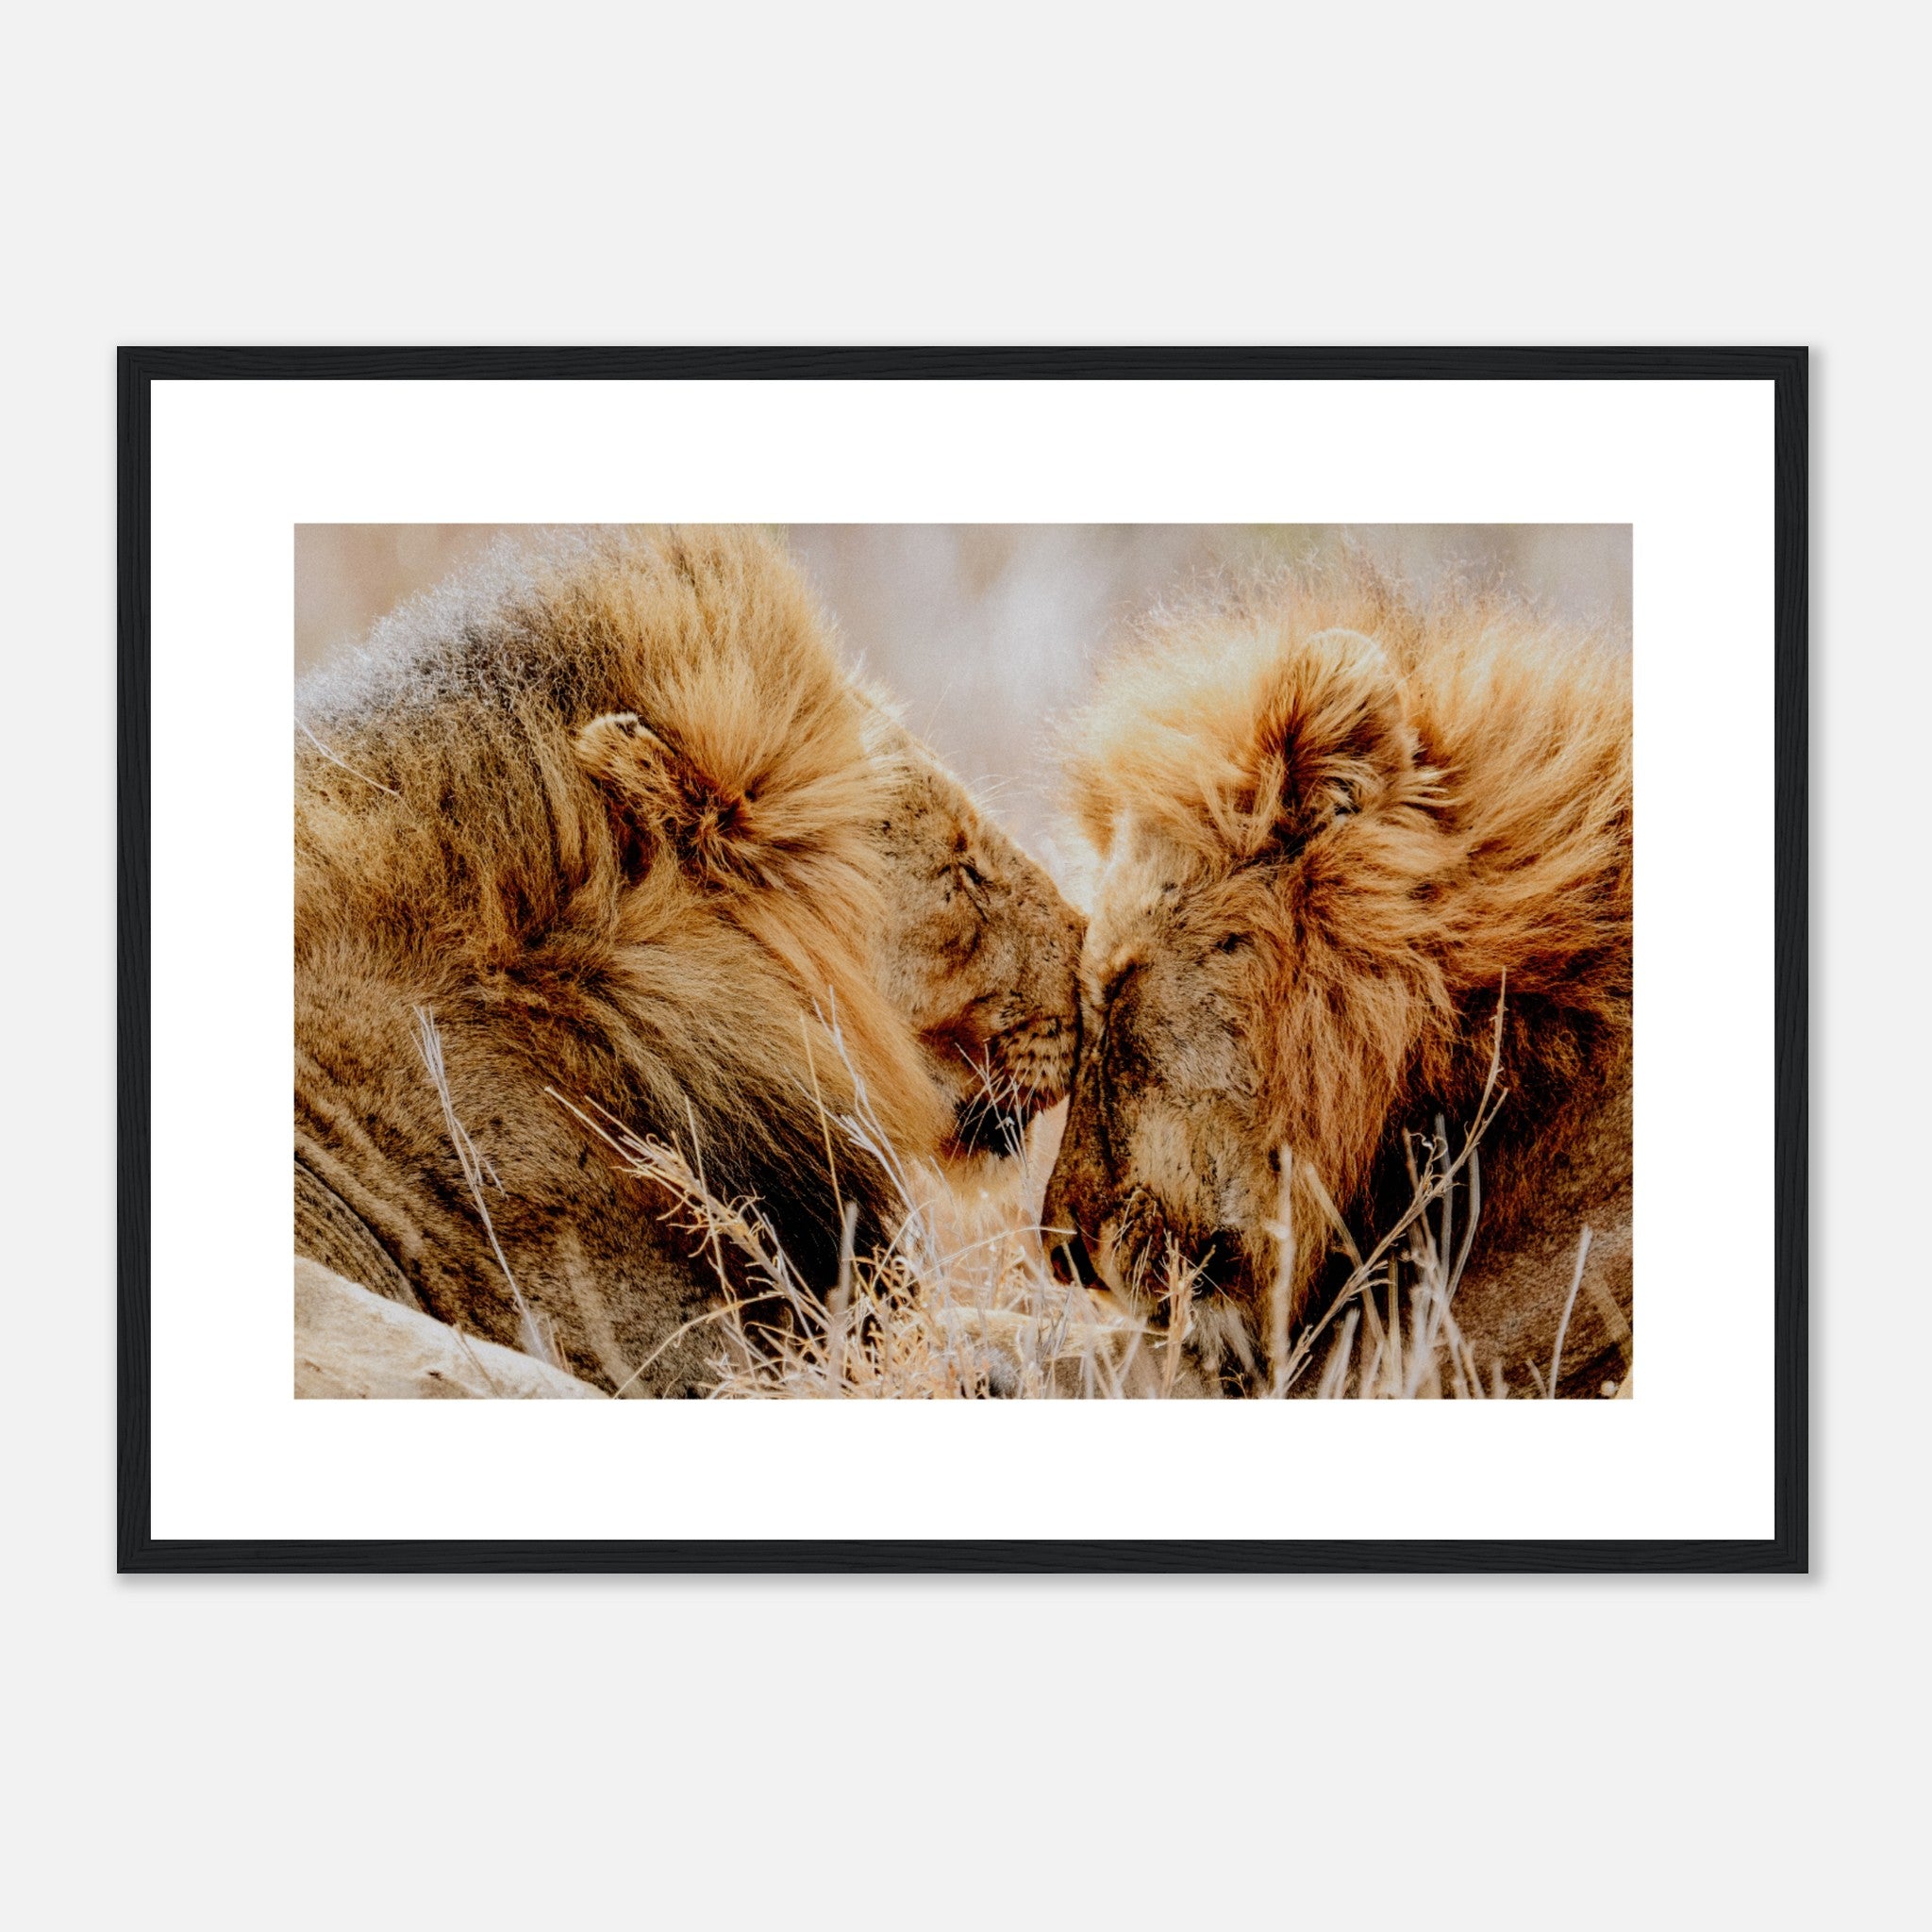 Cute Lions In Their Habitat Poster